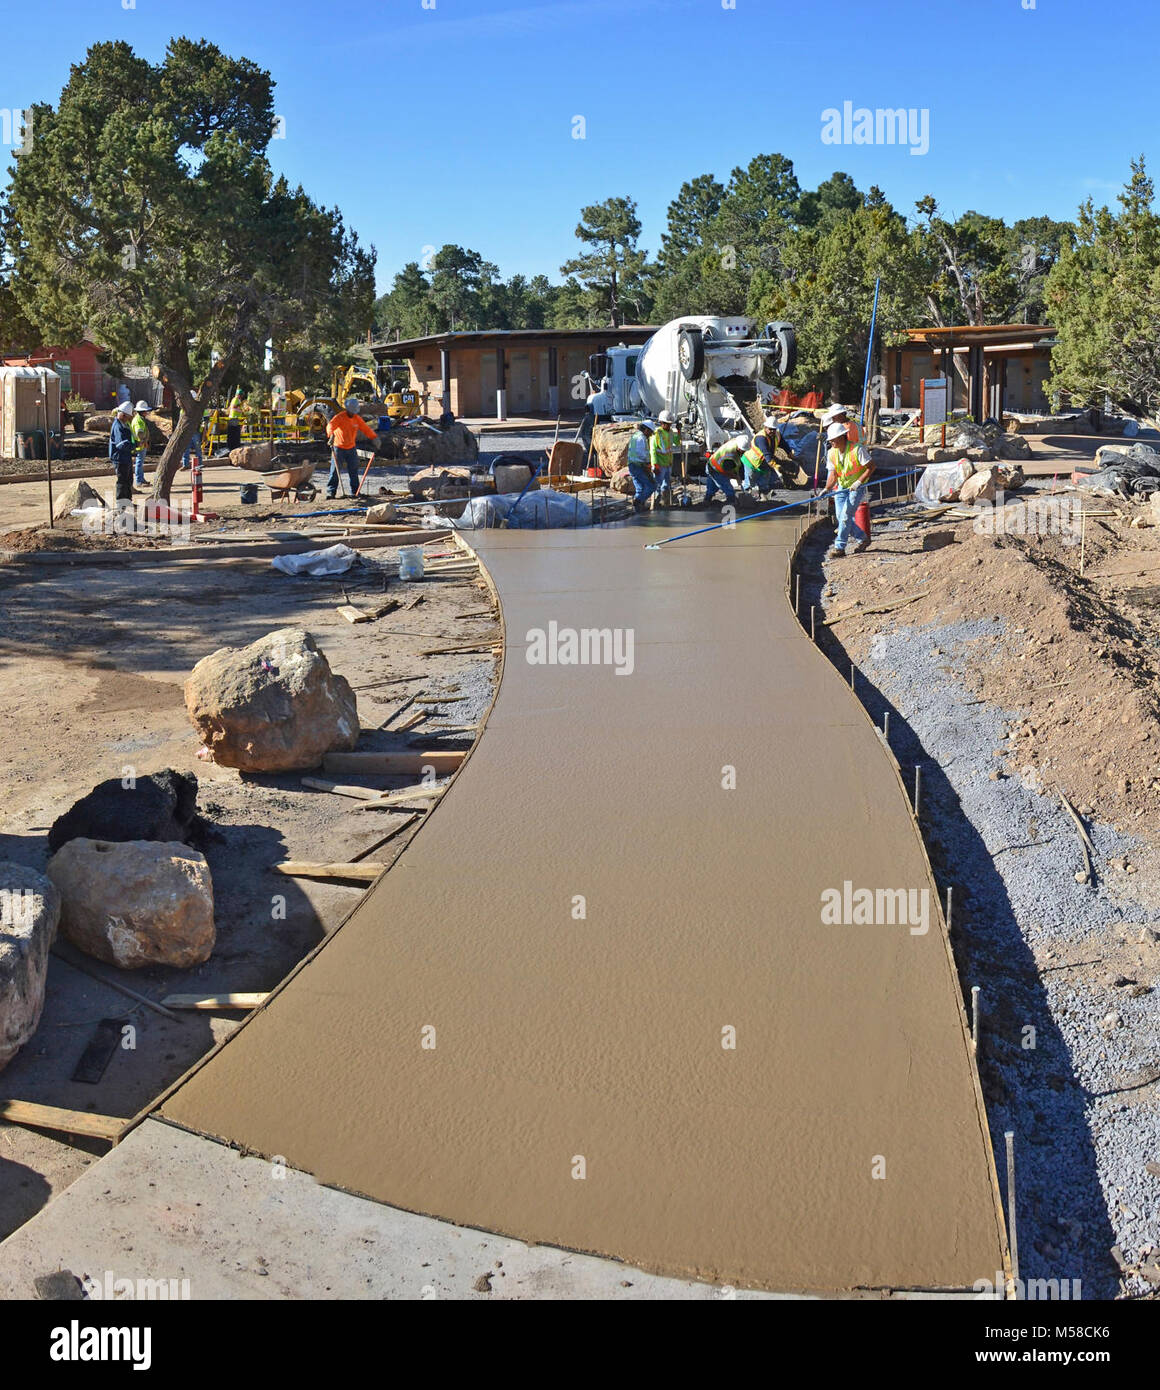 Grand Canyon NP Bright Angel Trailhead Project Concrete Walkway Paving. April, 24, 2013. With landscape boulders and stonework set in place, workers are now completing the pavement . This includes concrete portions of the trailhead plaza and the remaining footpaths. The overall project is on schedule and should completed by mid May, 2013. NPS Stock Photo